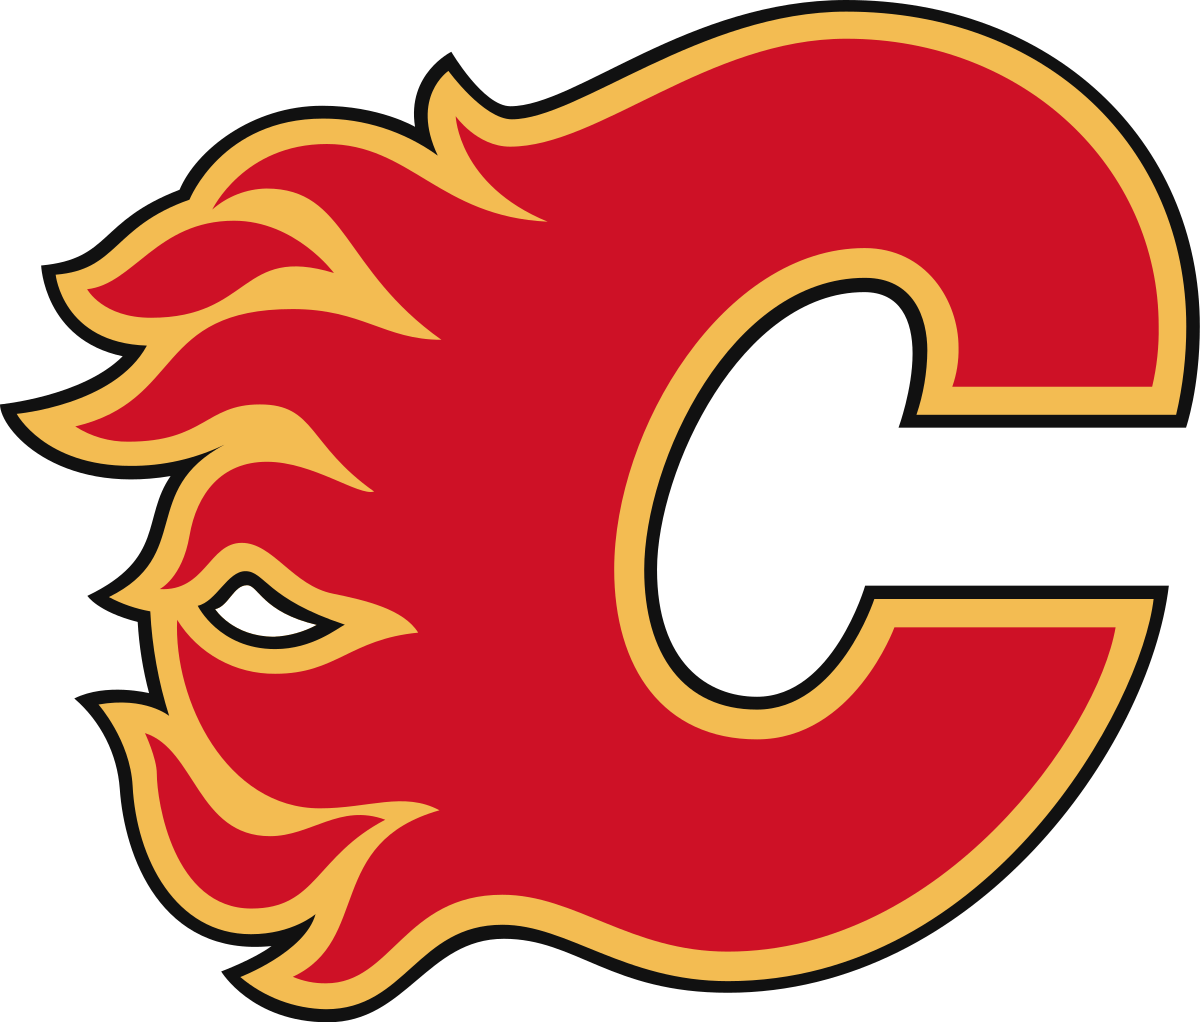 Black and Red Flame Logo - Calgary Flames